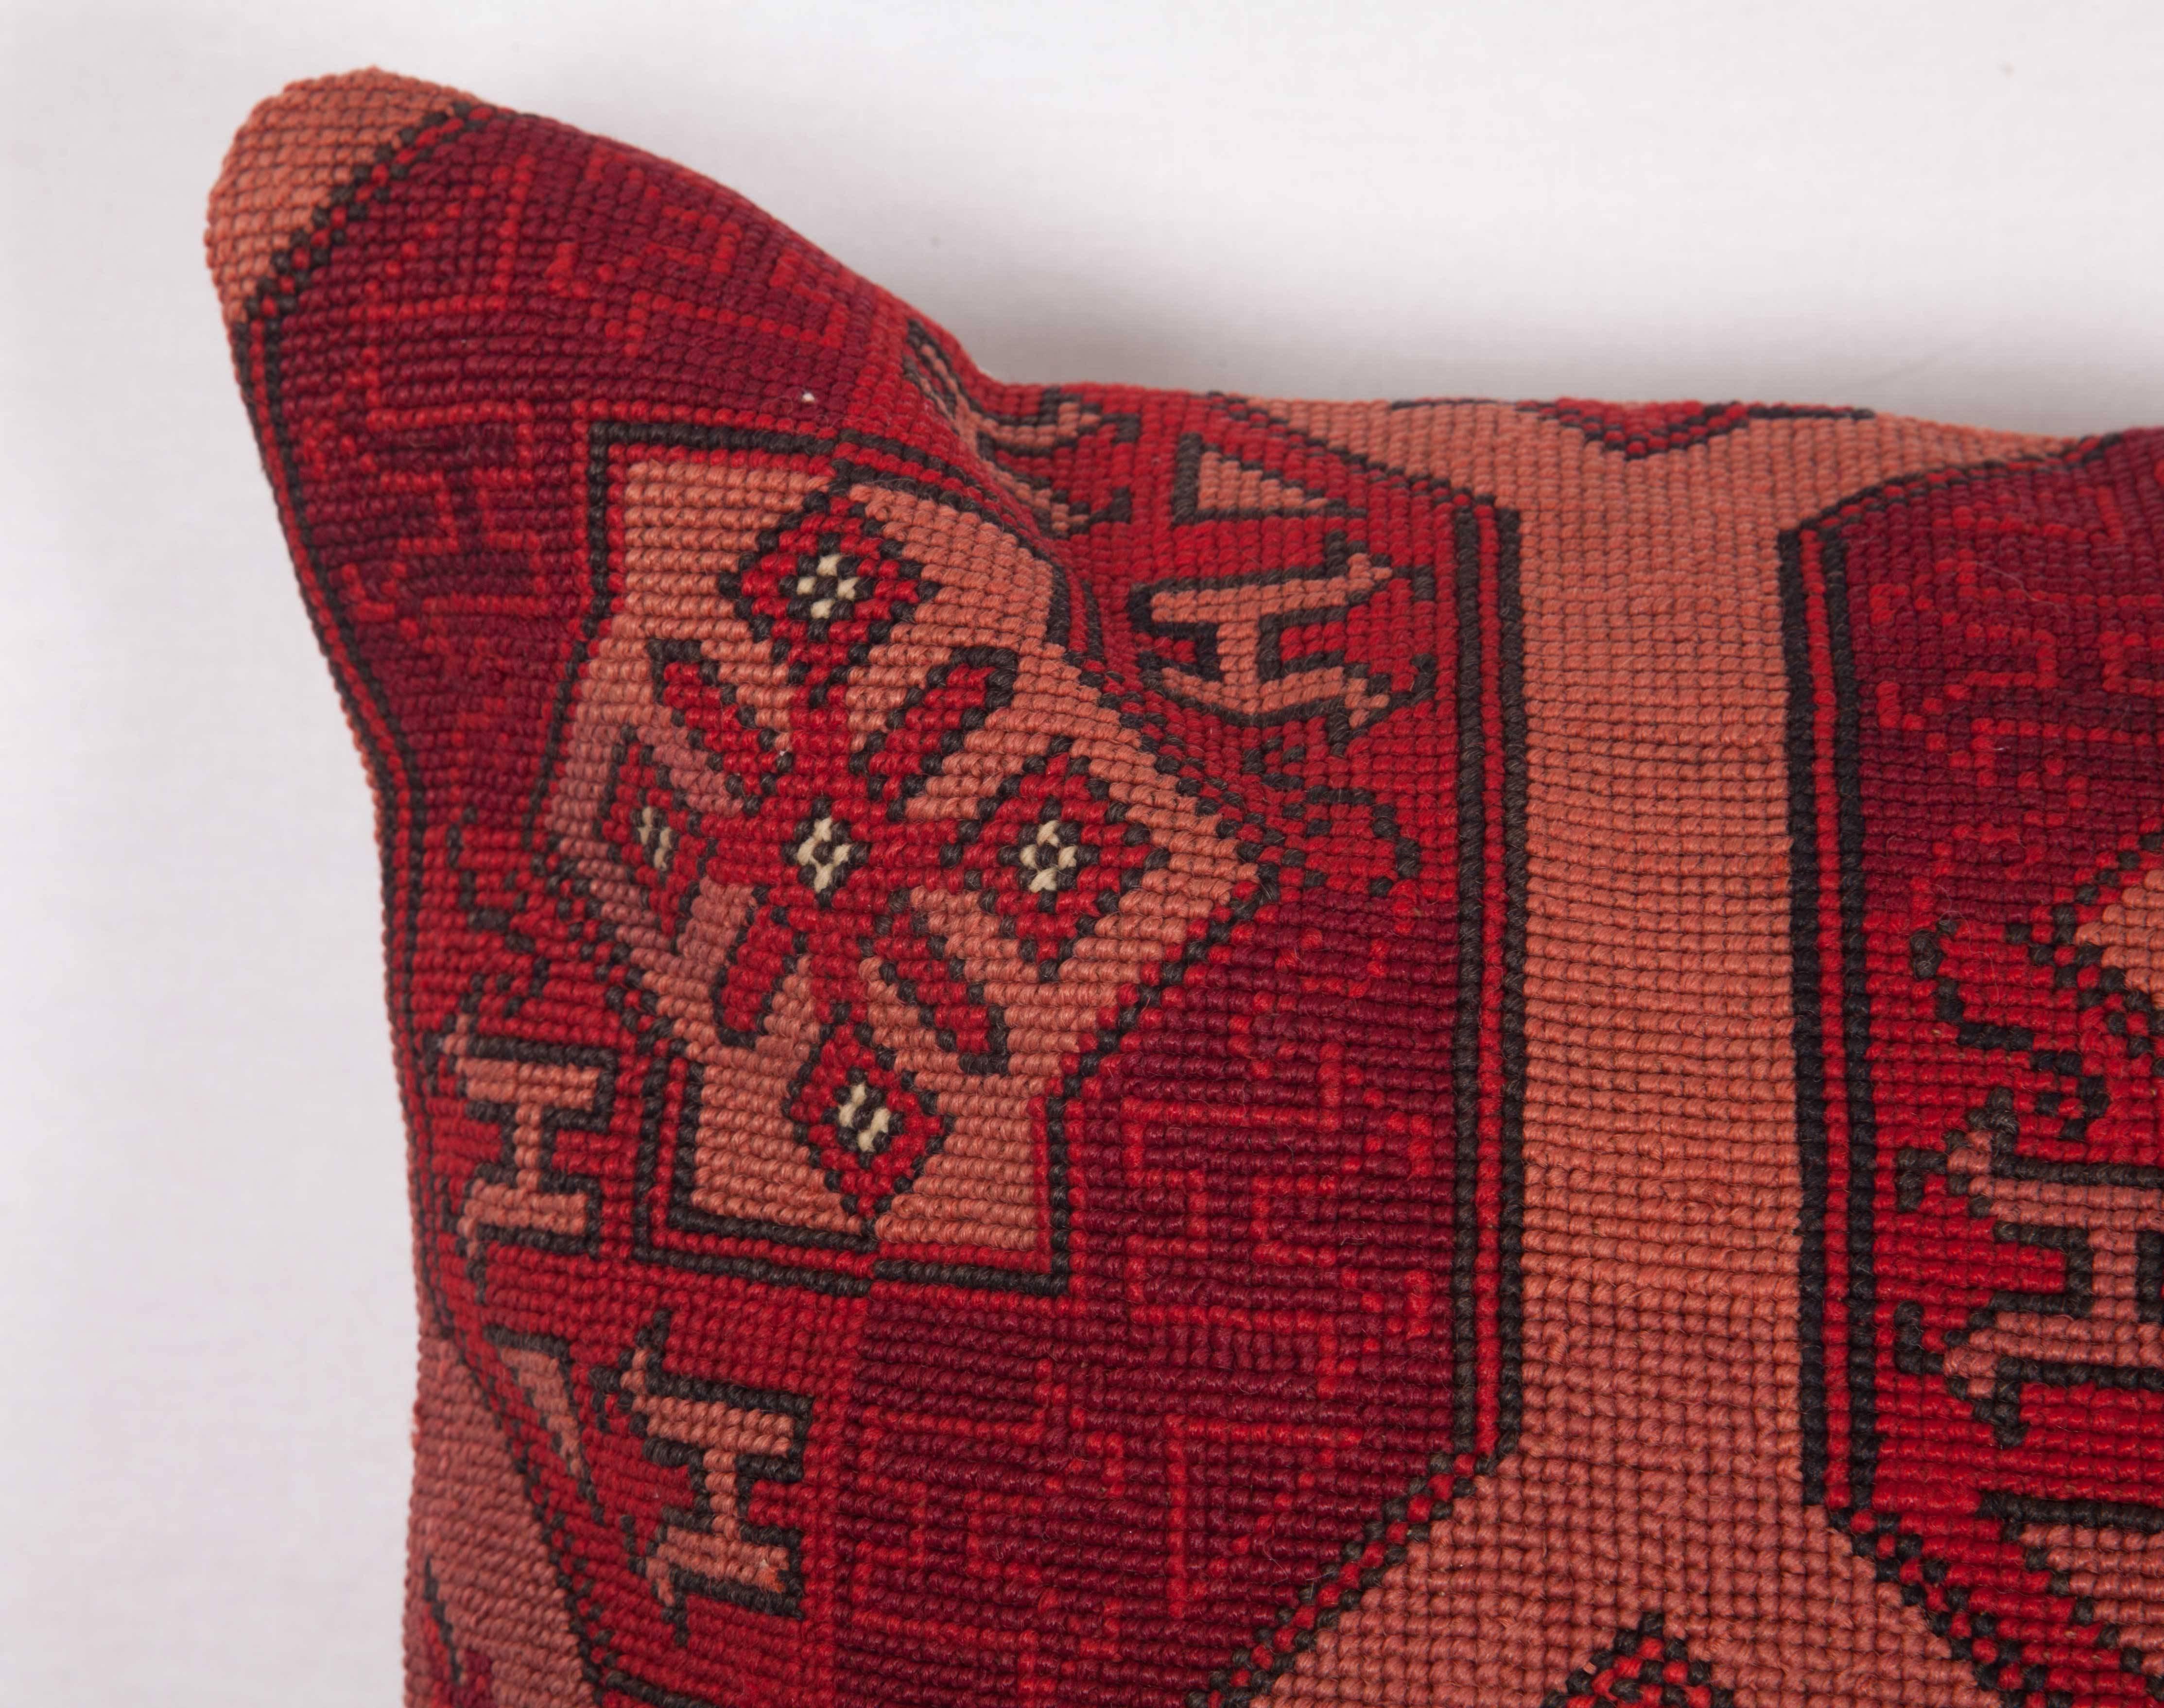 Uzbek Pillow Made Out of an Early 20th Century Central Asian Cross Stitch Embroidery